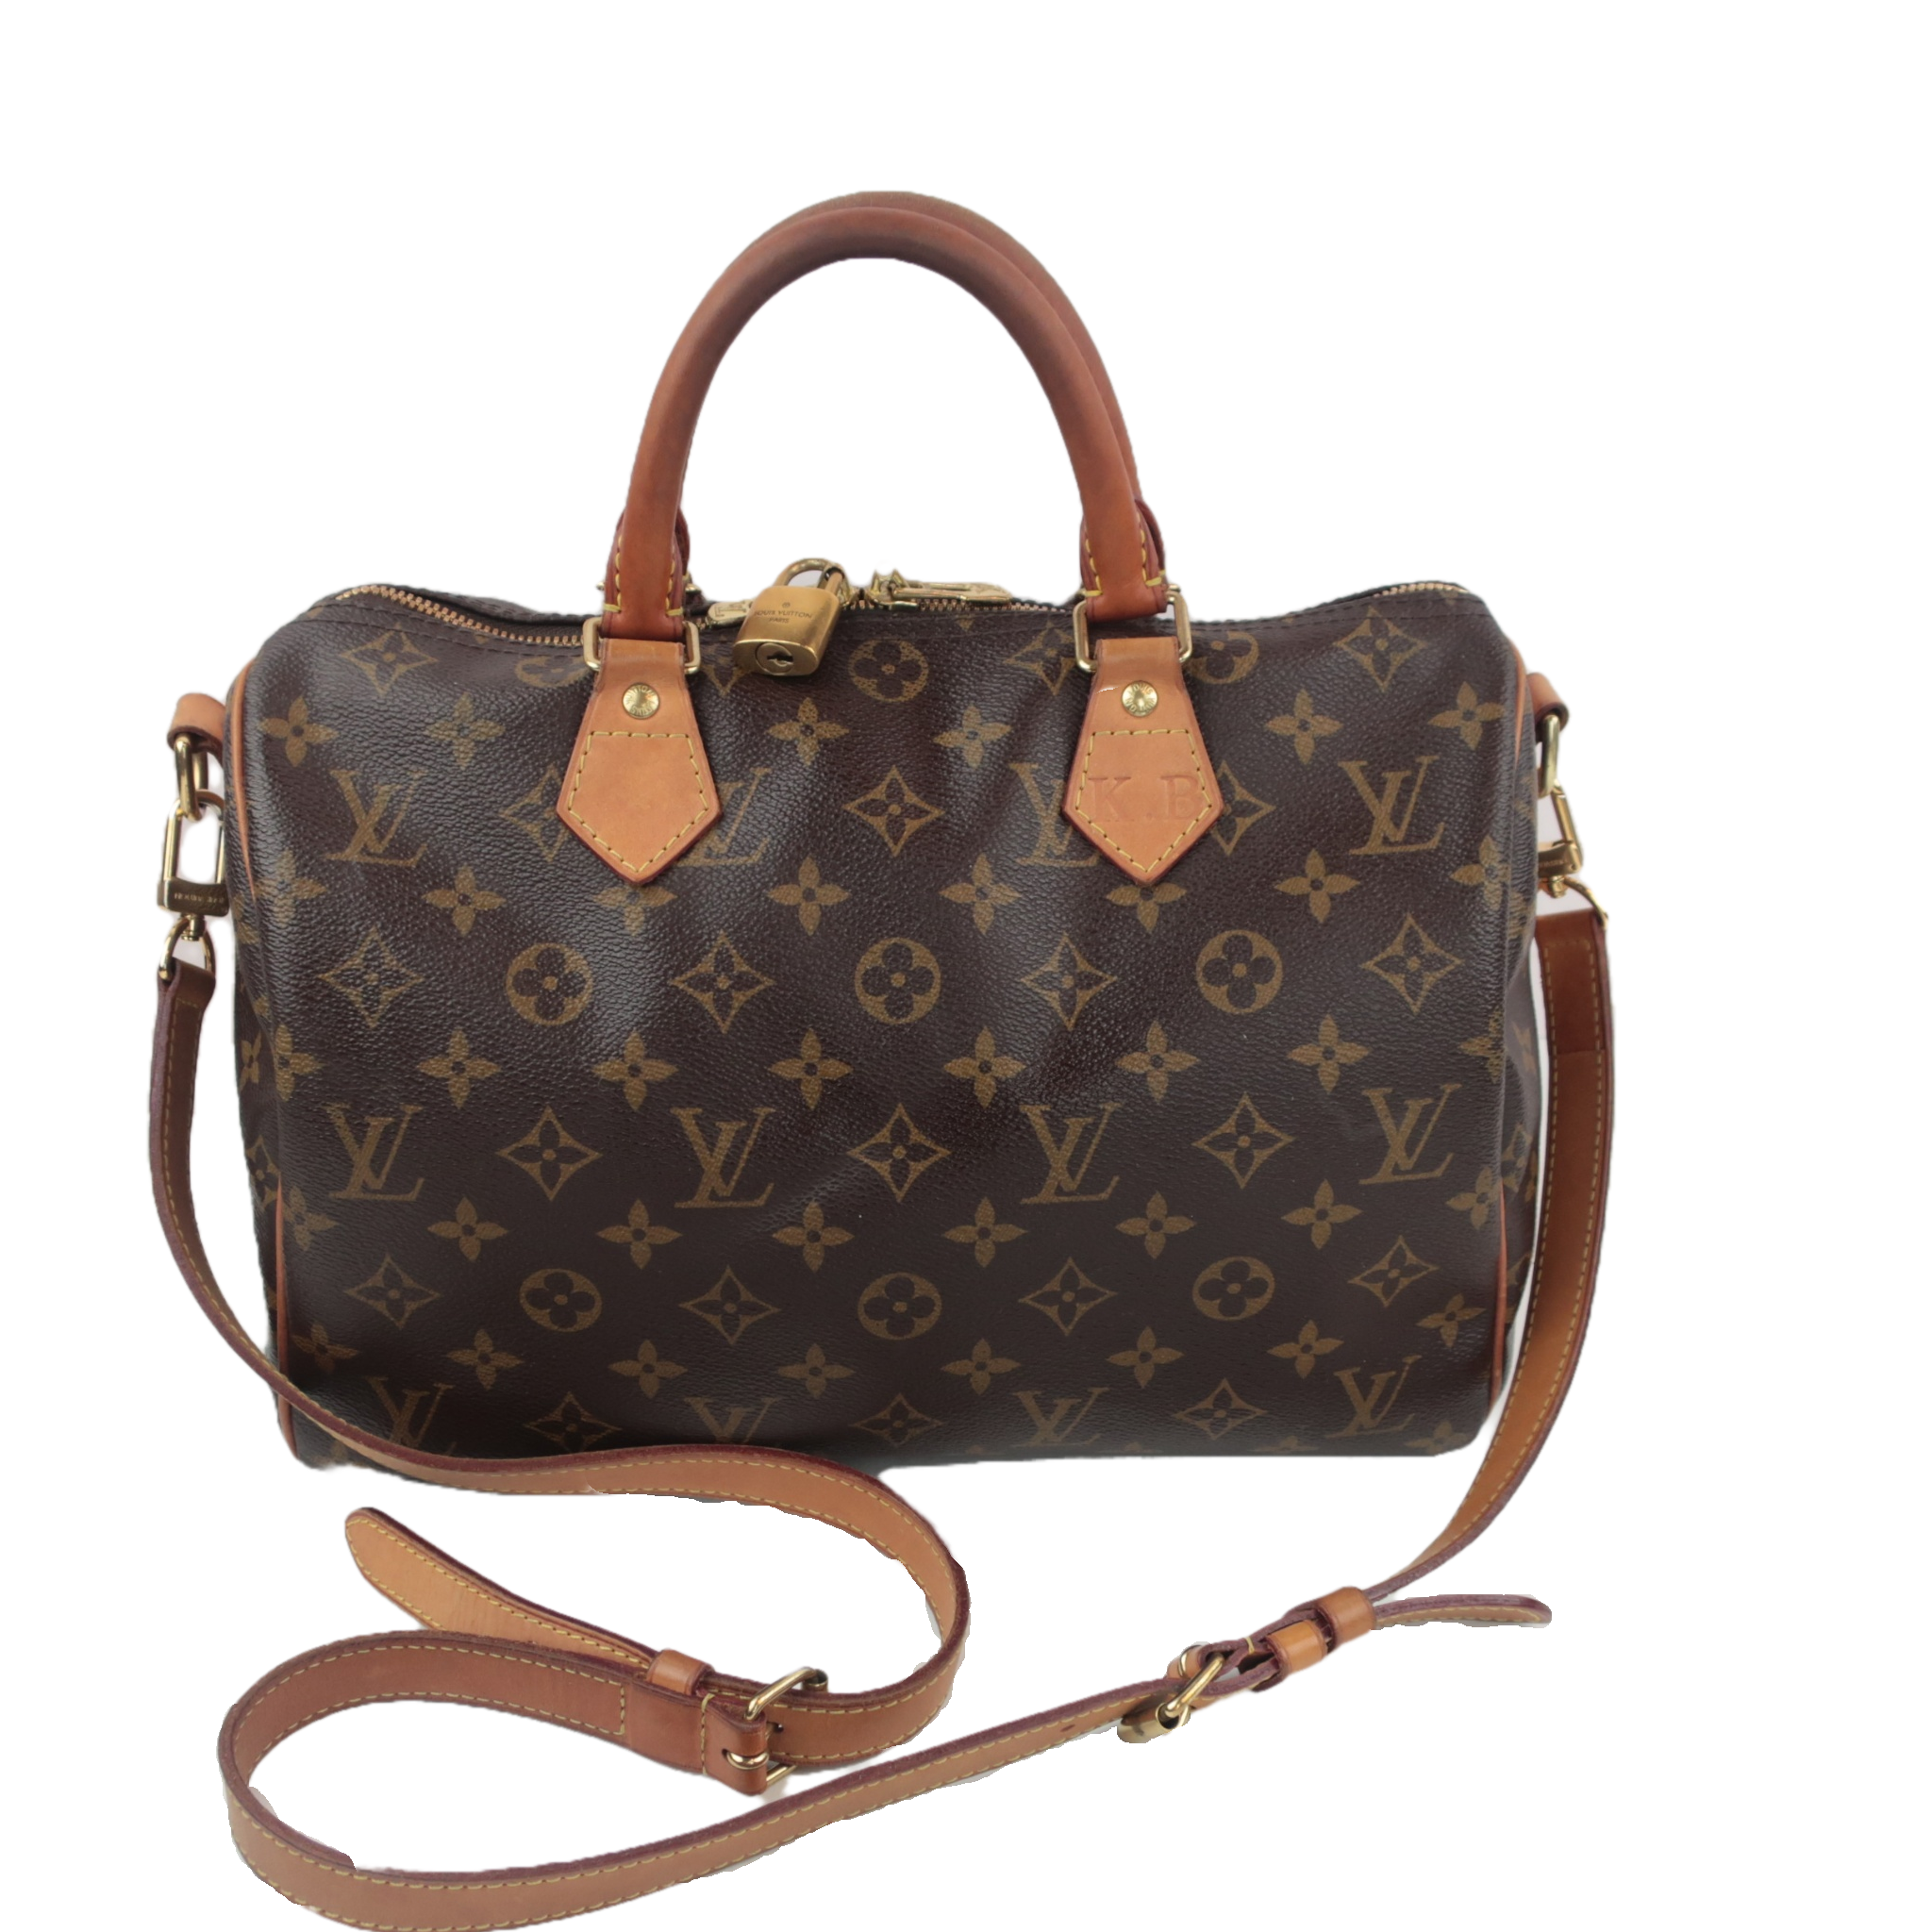 Is Your Diaper Bag? Best Louis Vuitton Handbags To Use –